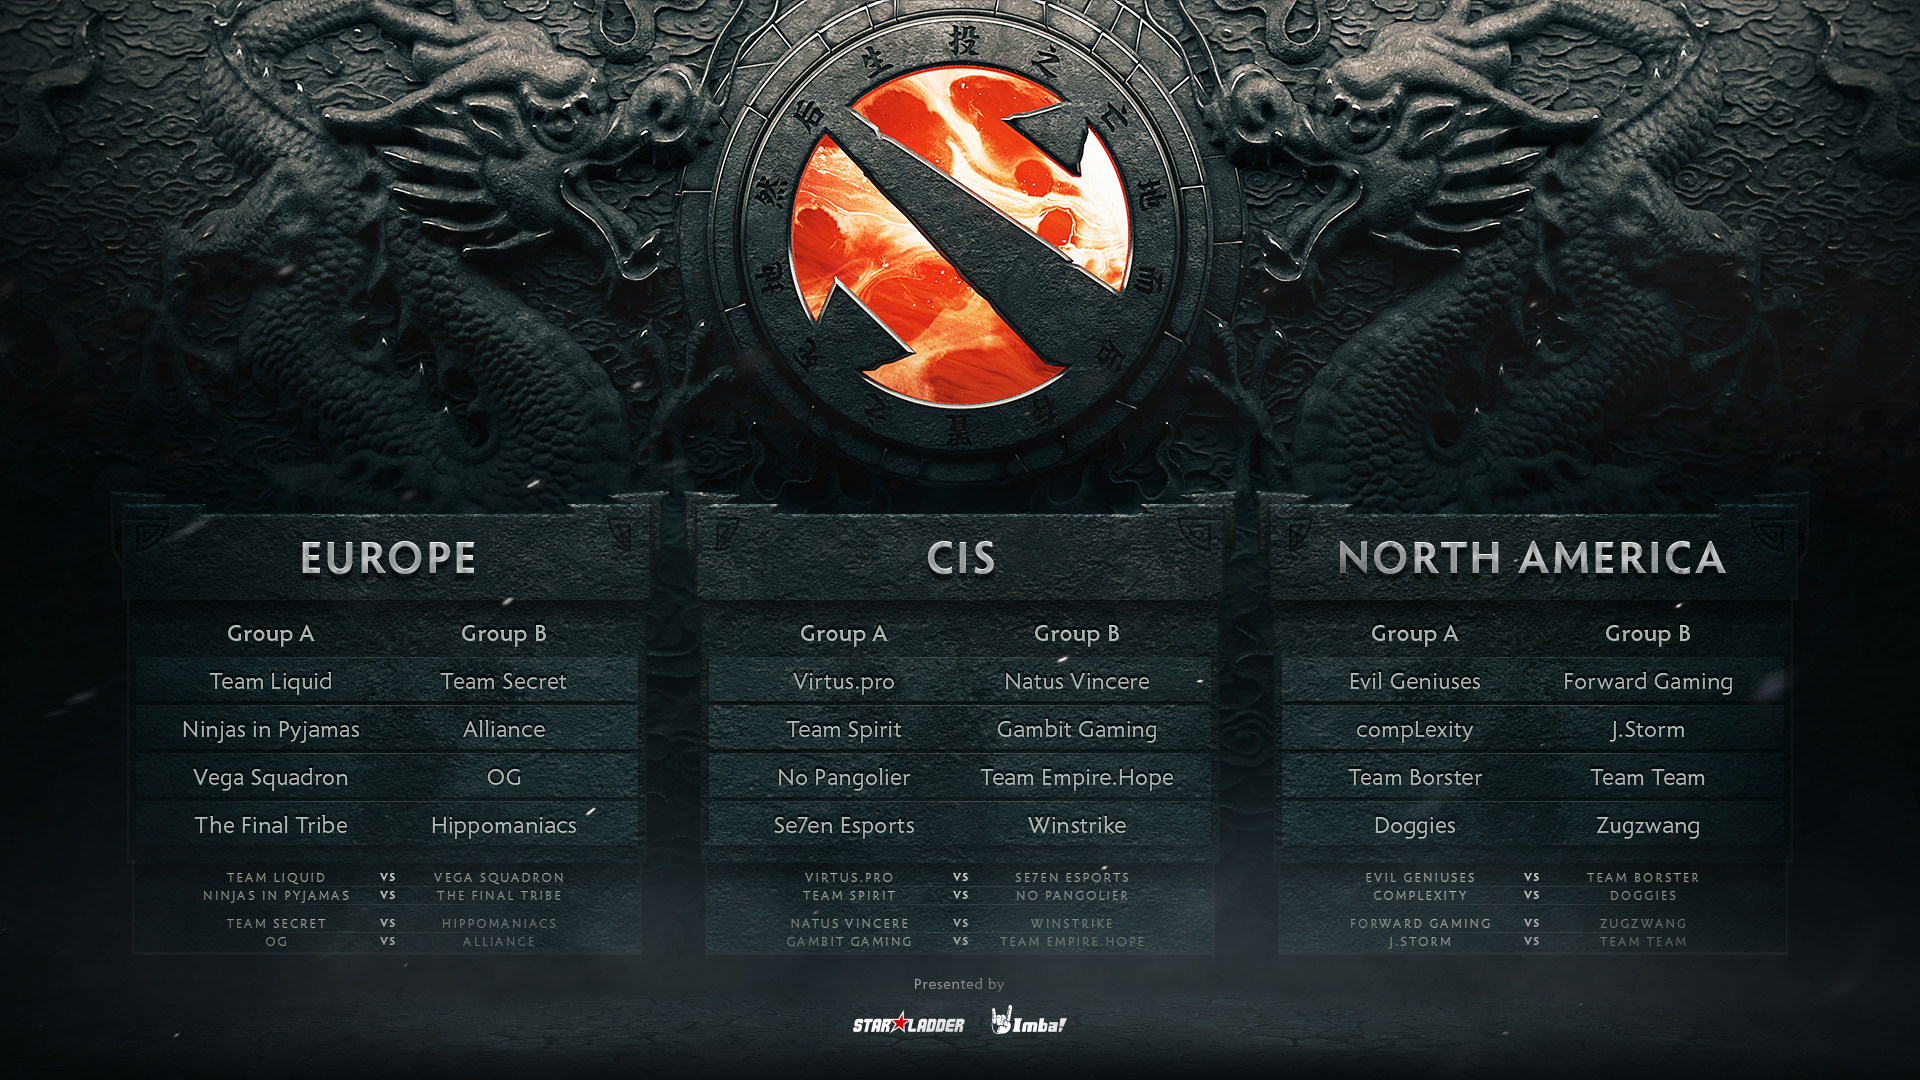 The Chongqing Major Teams Seeding For The Main Qualifiers